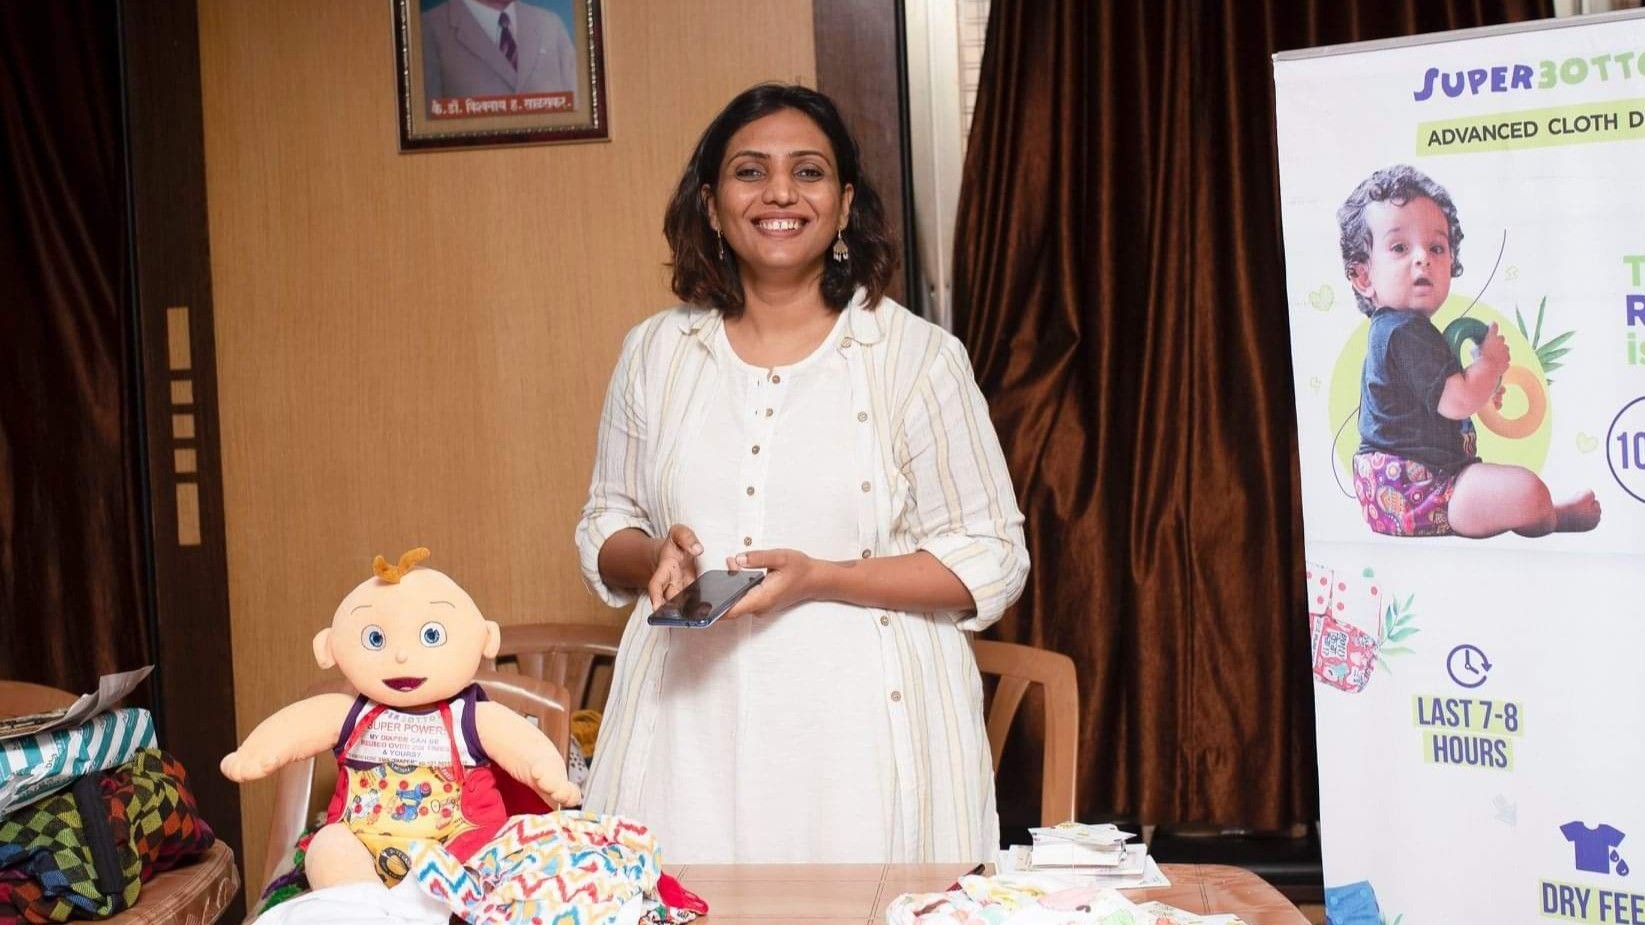 Motherhood Made Her Quit High-Paying Job - Mompreneur Now Owns A Multi Crore Revenue Company With Her Smart-Solution